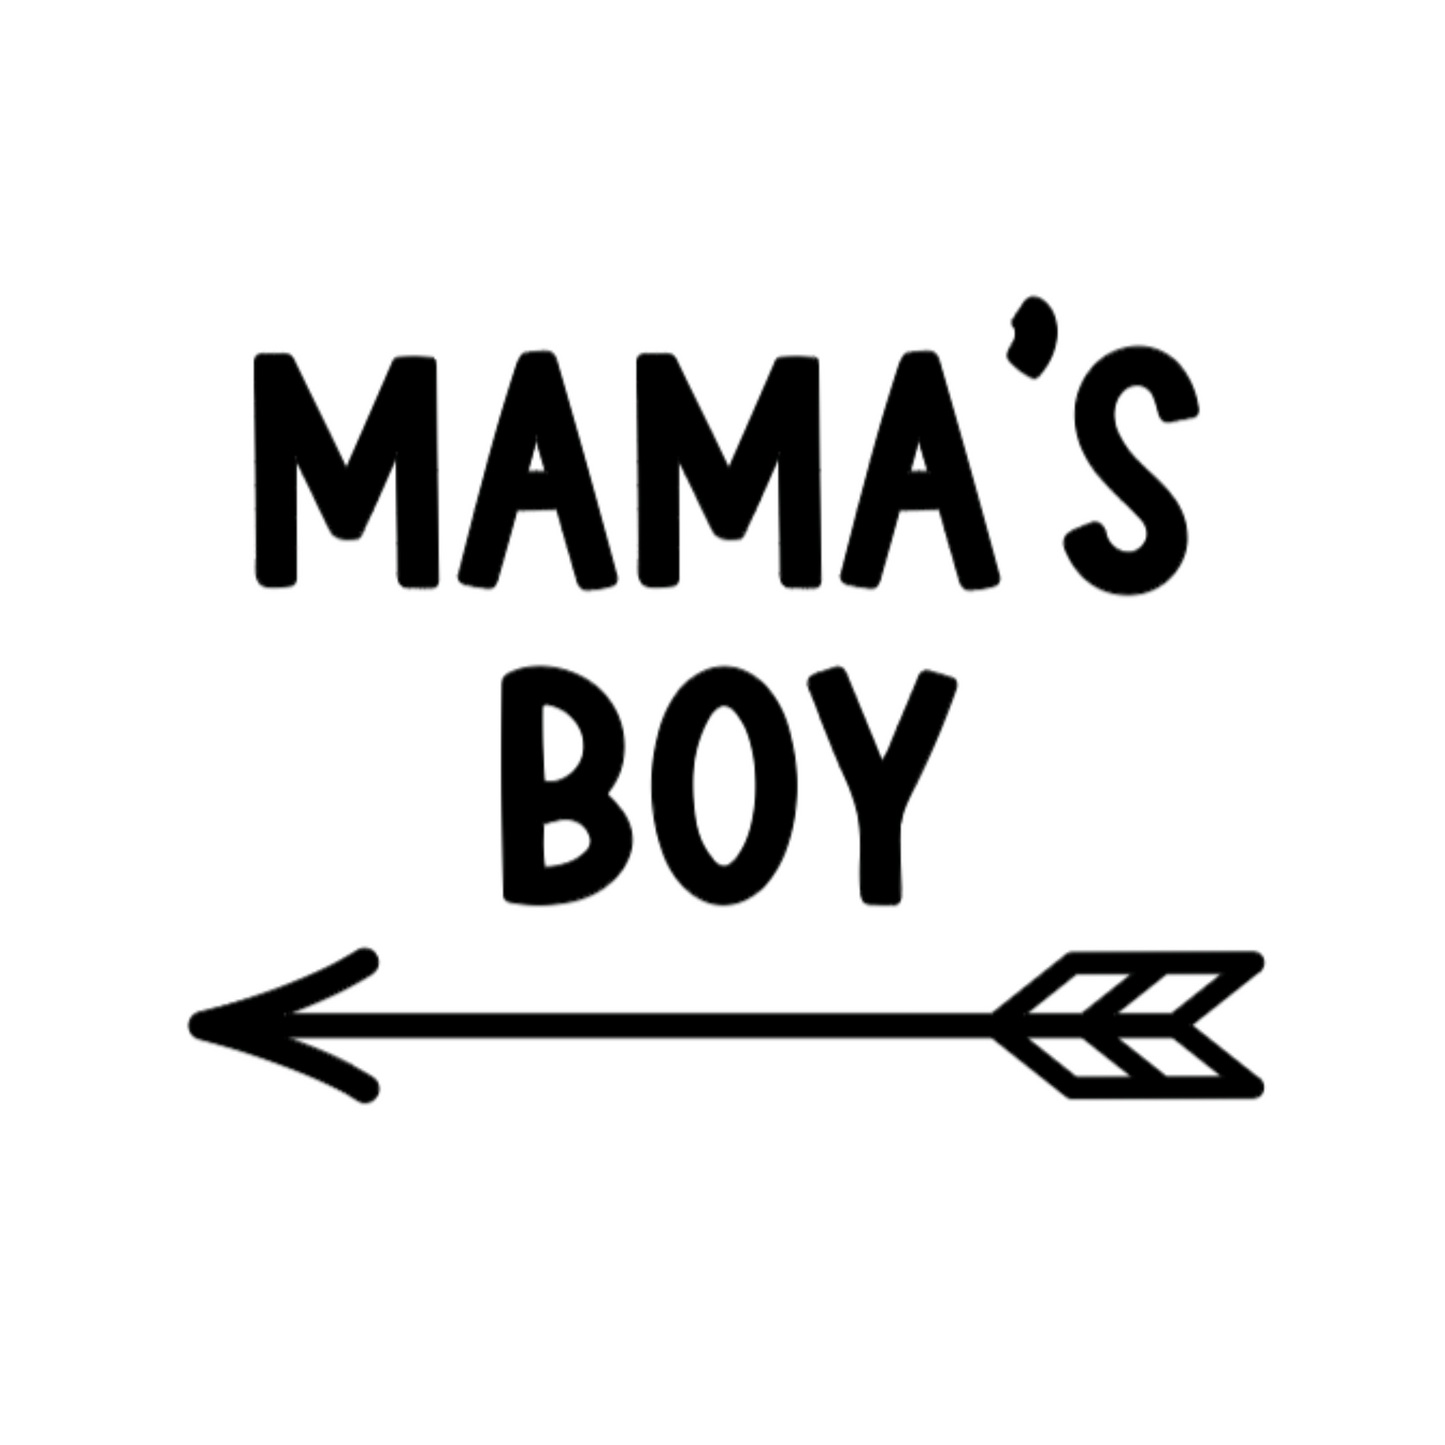 Mama's Boy - Three Quarter Baseball T-Shirt. Sleeves in a Heather light blue on the sleeves with a white base. Mama's Boy is in black with an arrow below it pointing to the left. This is an image of the design on a white background.